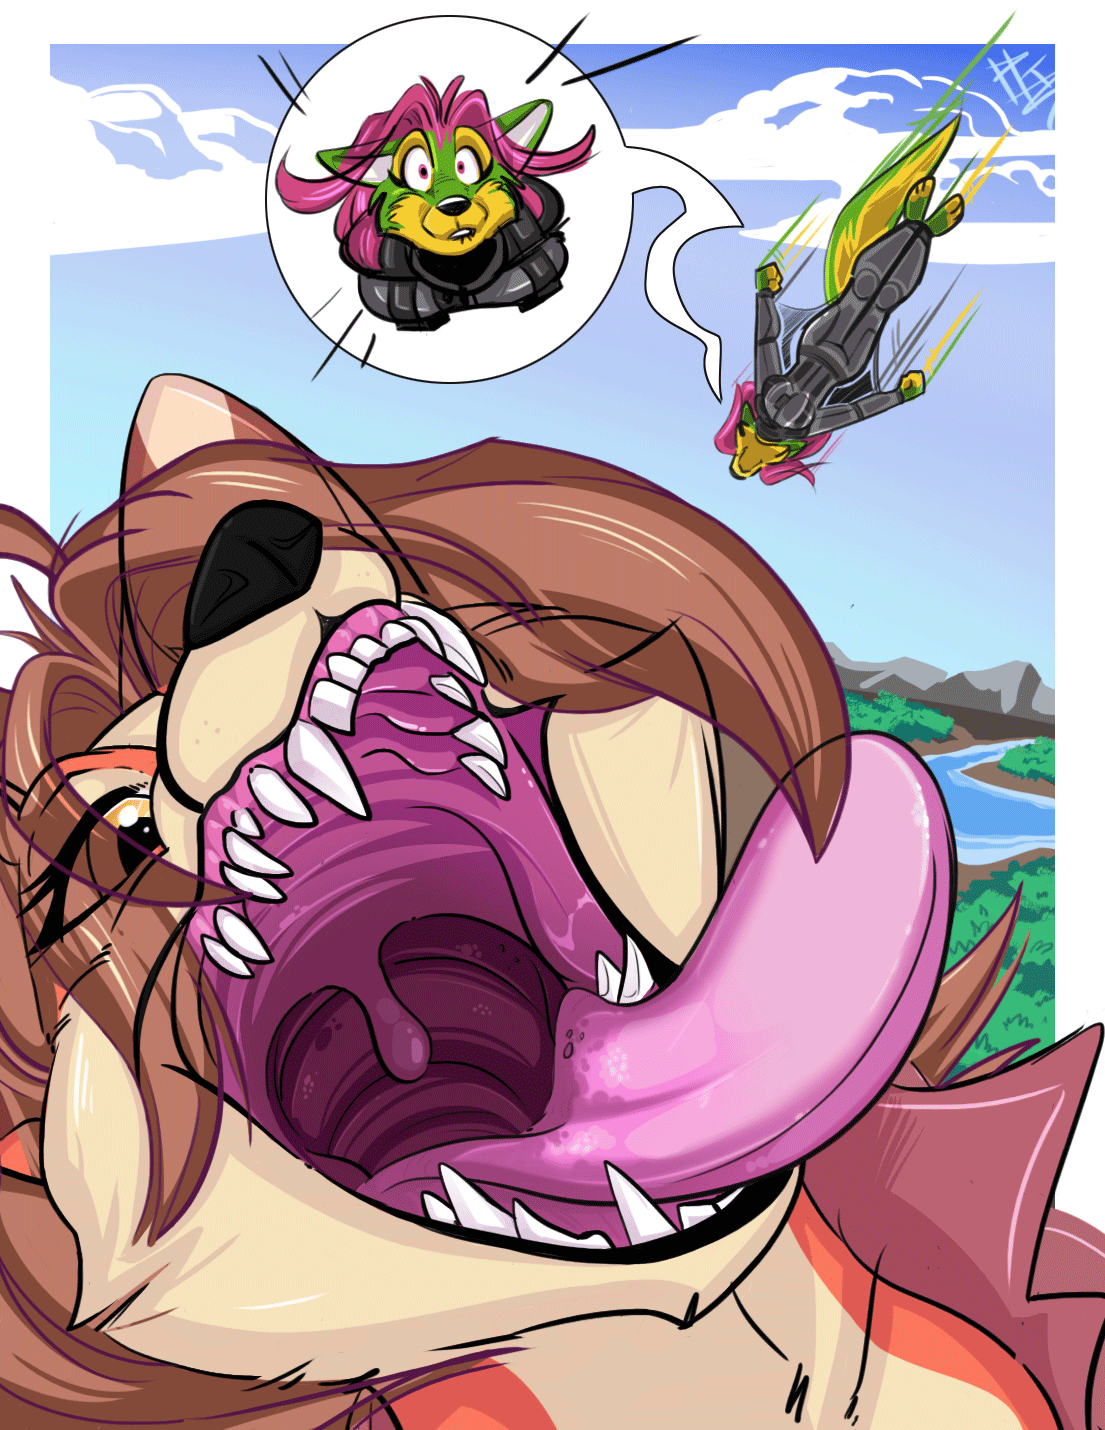 Surprise,vore attack! (Gif) by Terra64 -- Fur Affinity [dot] net